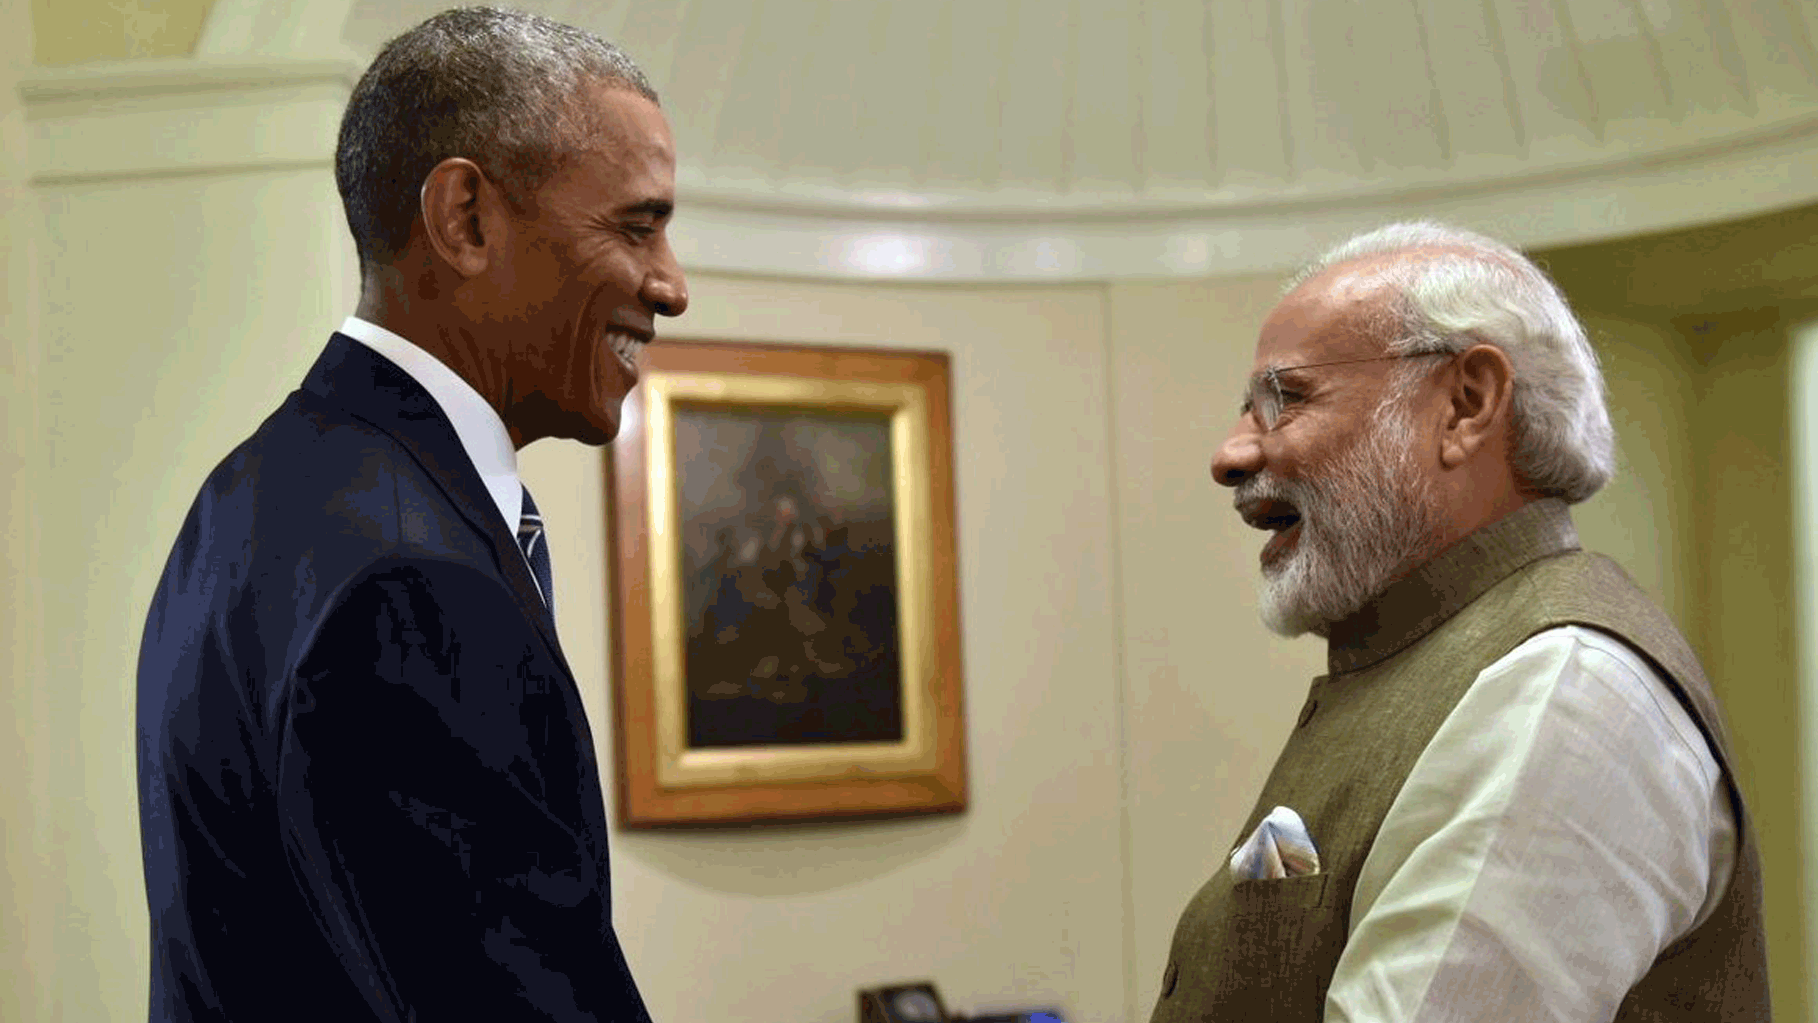 

US President Barack Obama and Narendra Modi greeting each other. (Photo Courtesy: Twitter/<a href="https://twitter.com/PMOIndia/status/740212897129725954">@PMOIndia</a>)